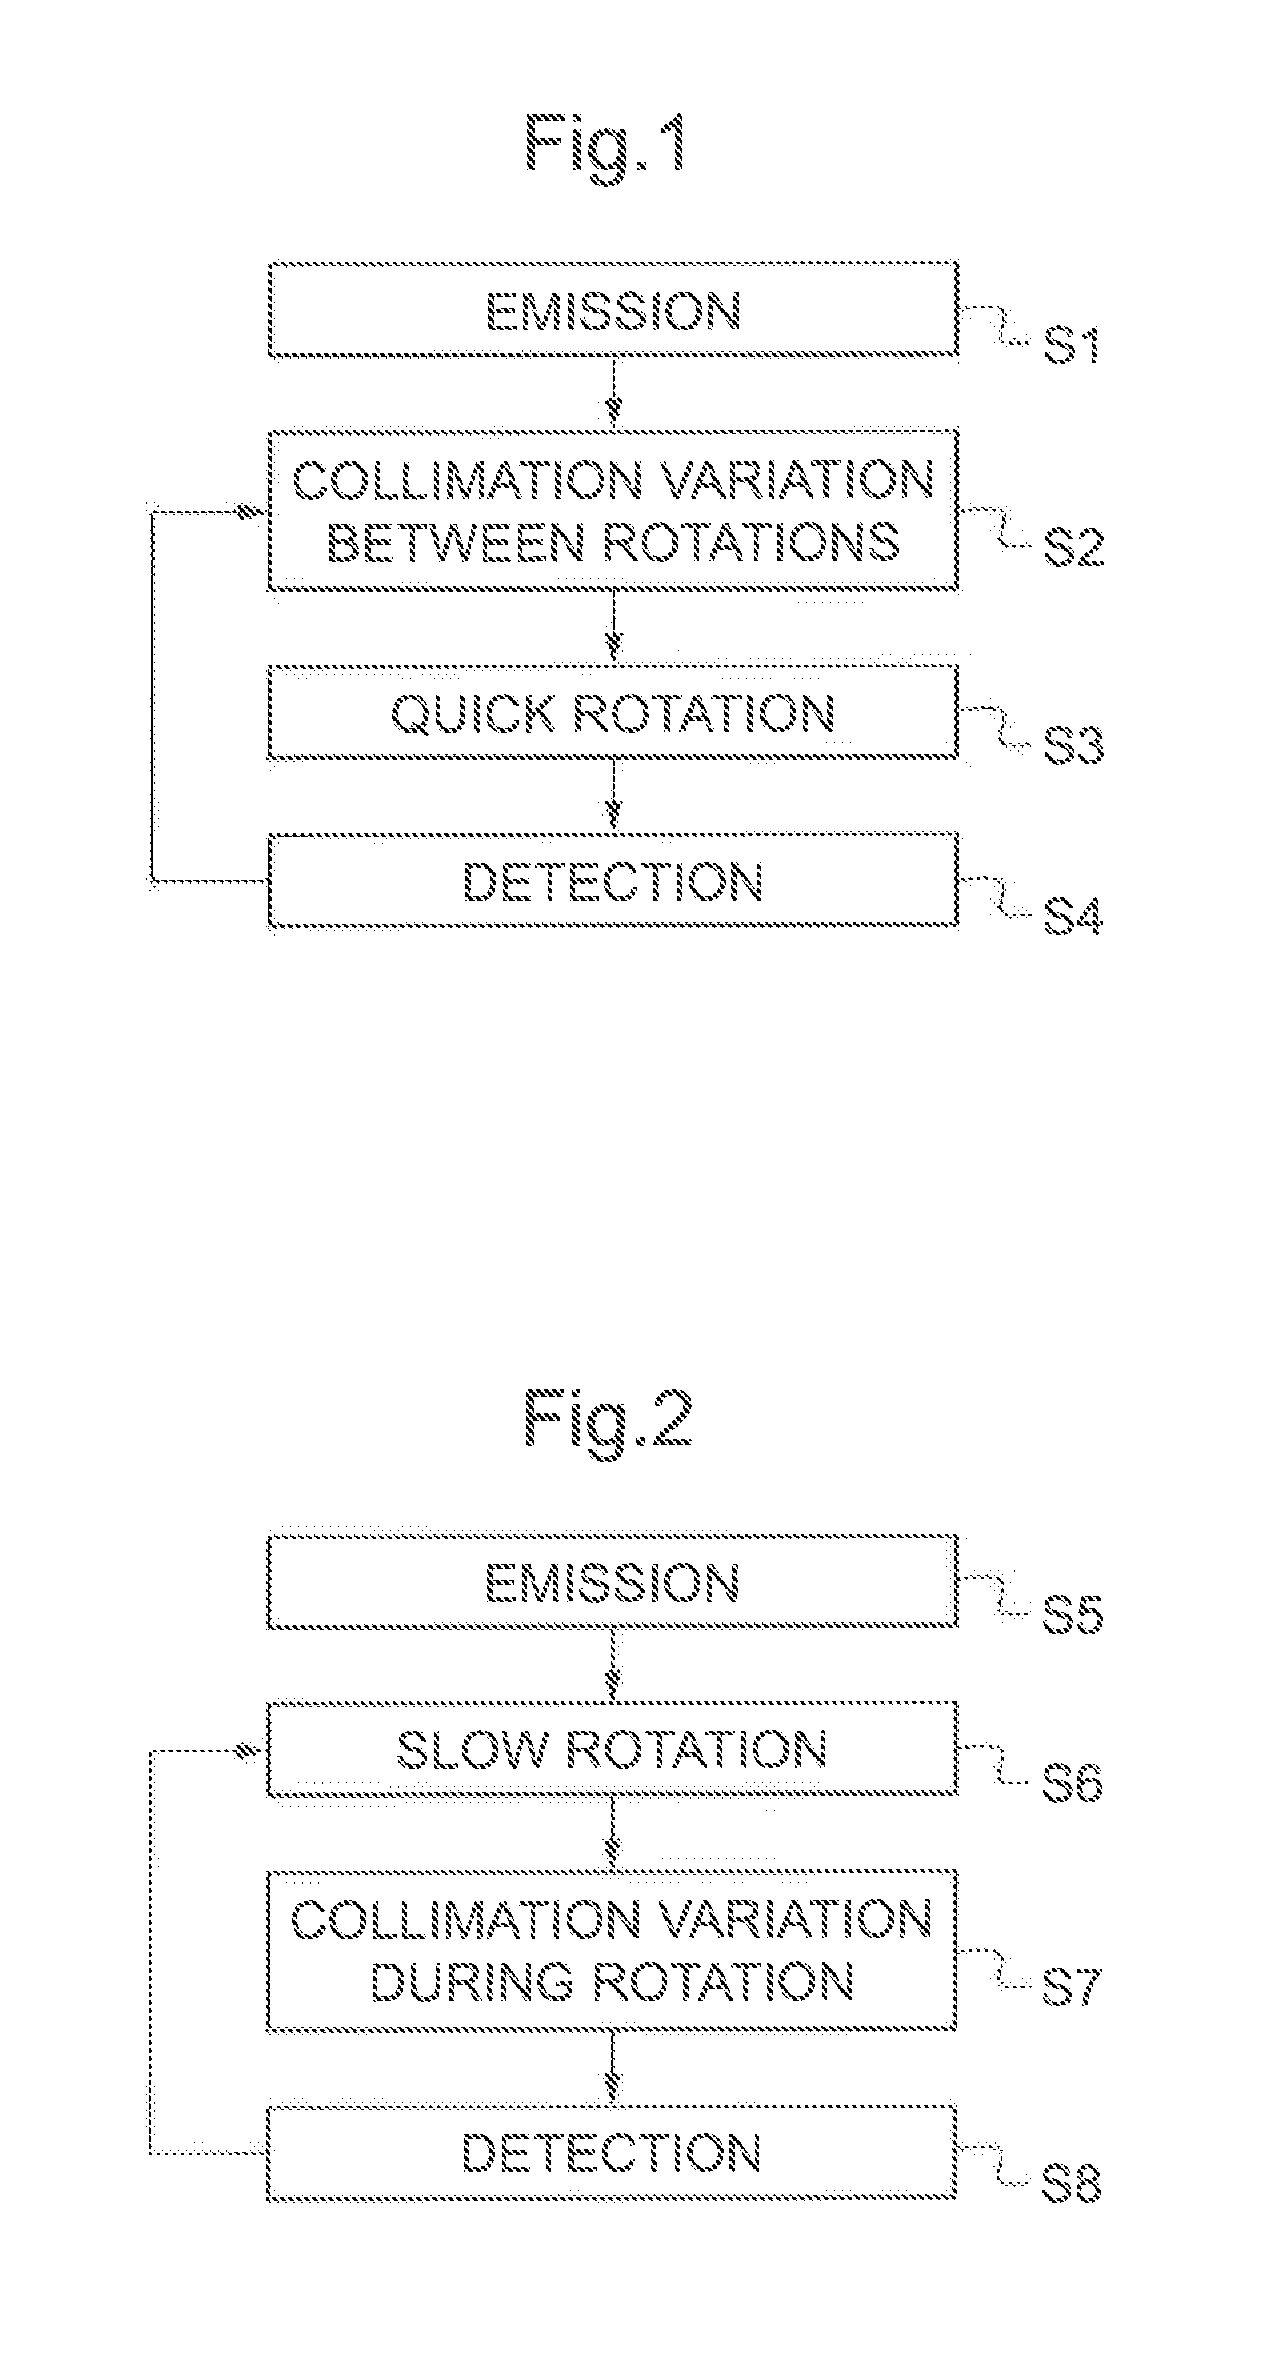 Medical imaging method varying collimation of emitted radiation beam